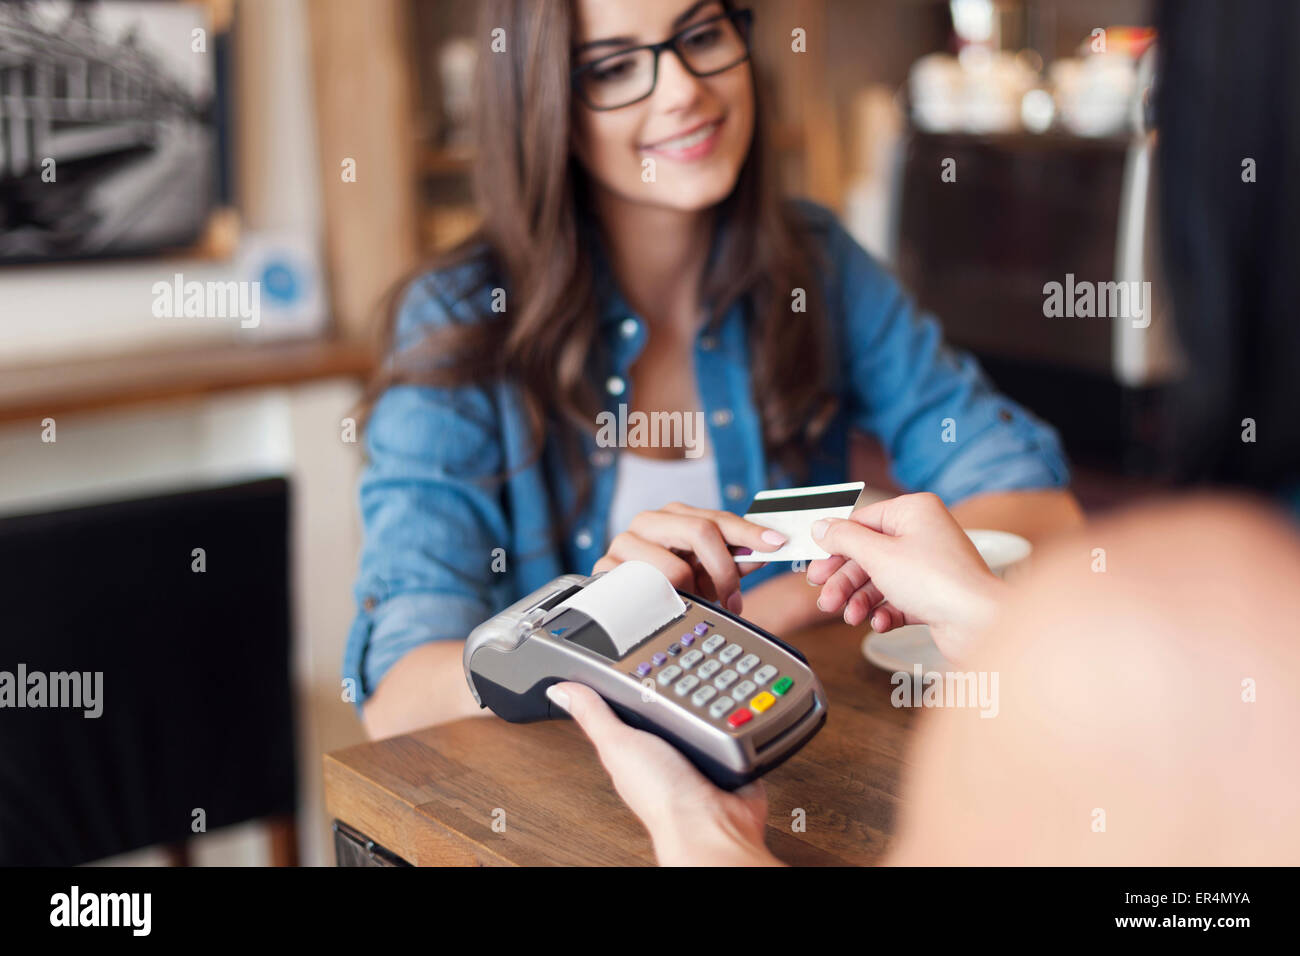 Smiling woman paying for coffee by credit card. Krakow, Poland Stock Photo